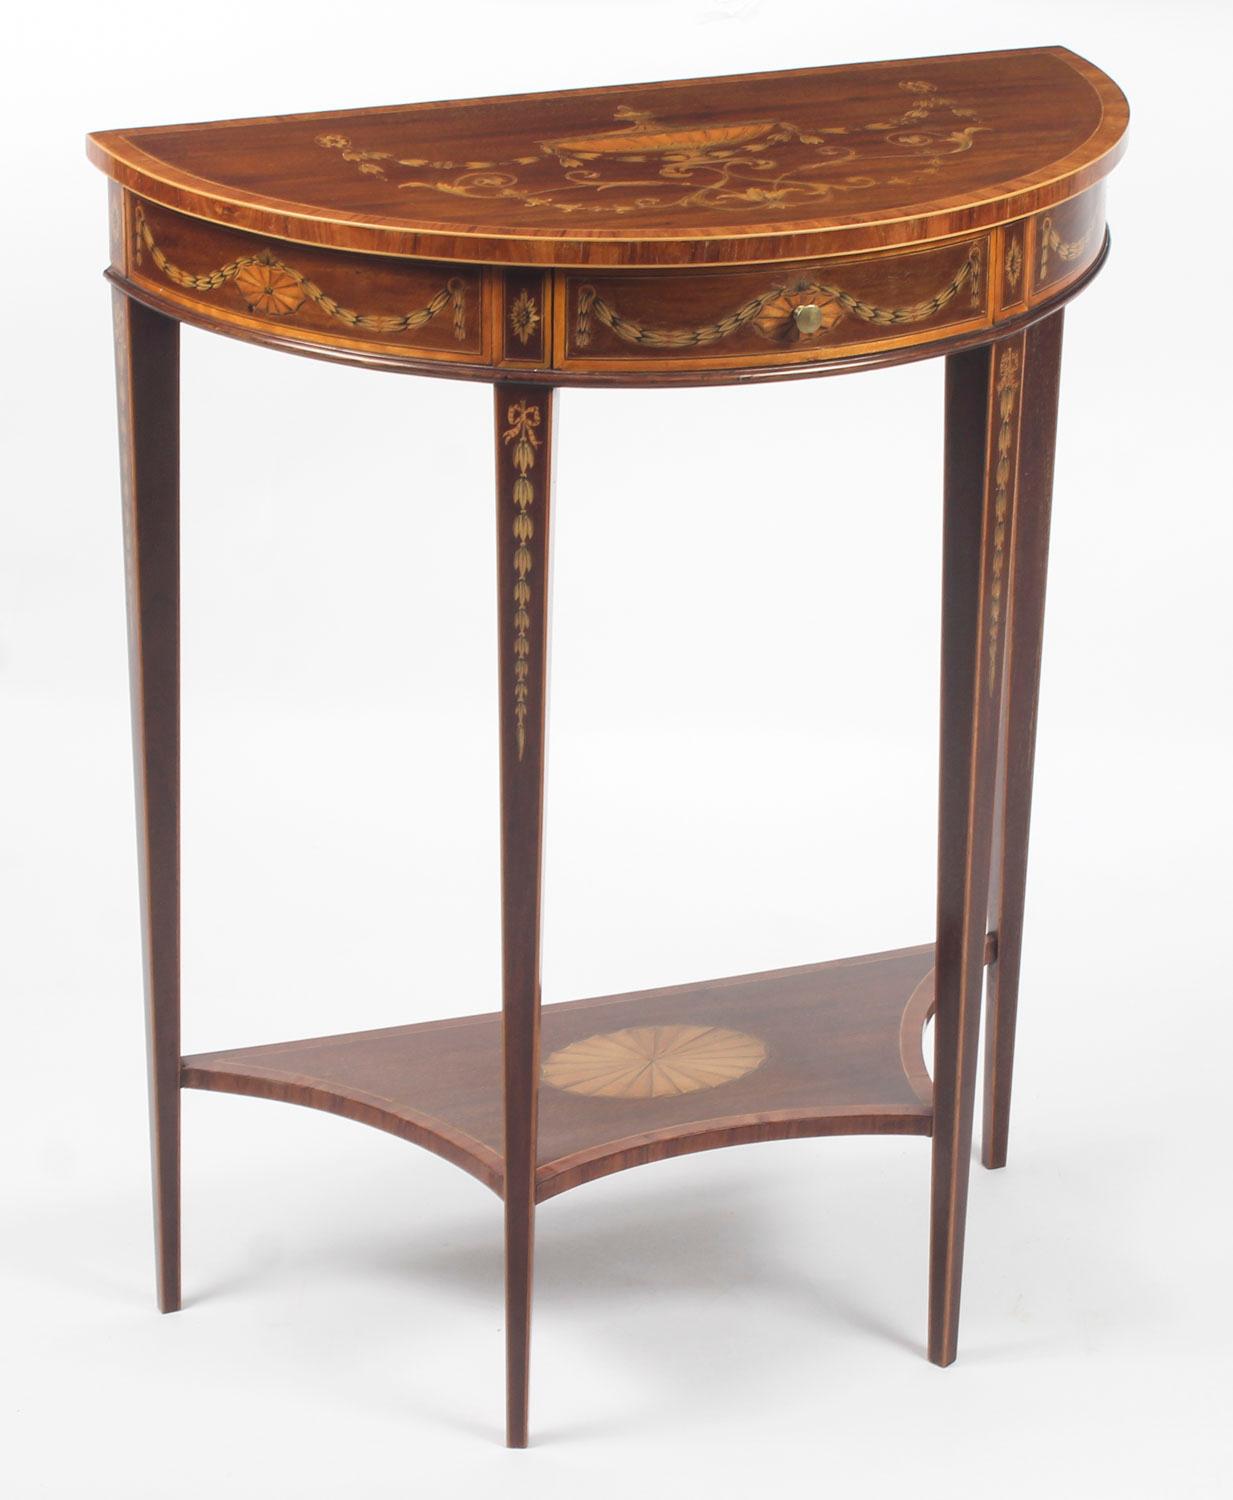 Antique Near Pair Demilune Mahogany & Marquetry Console Tables, 19th Century 4